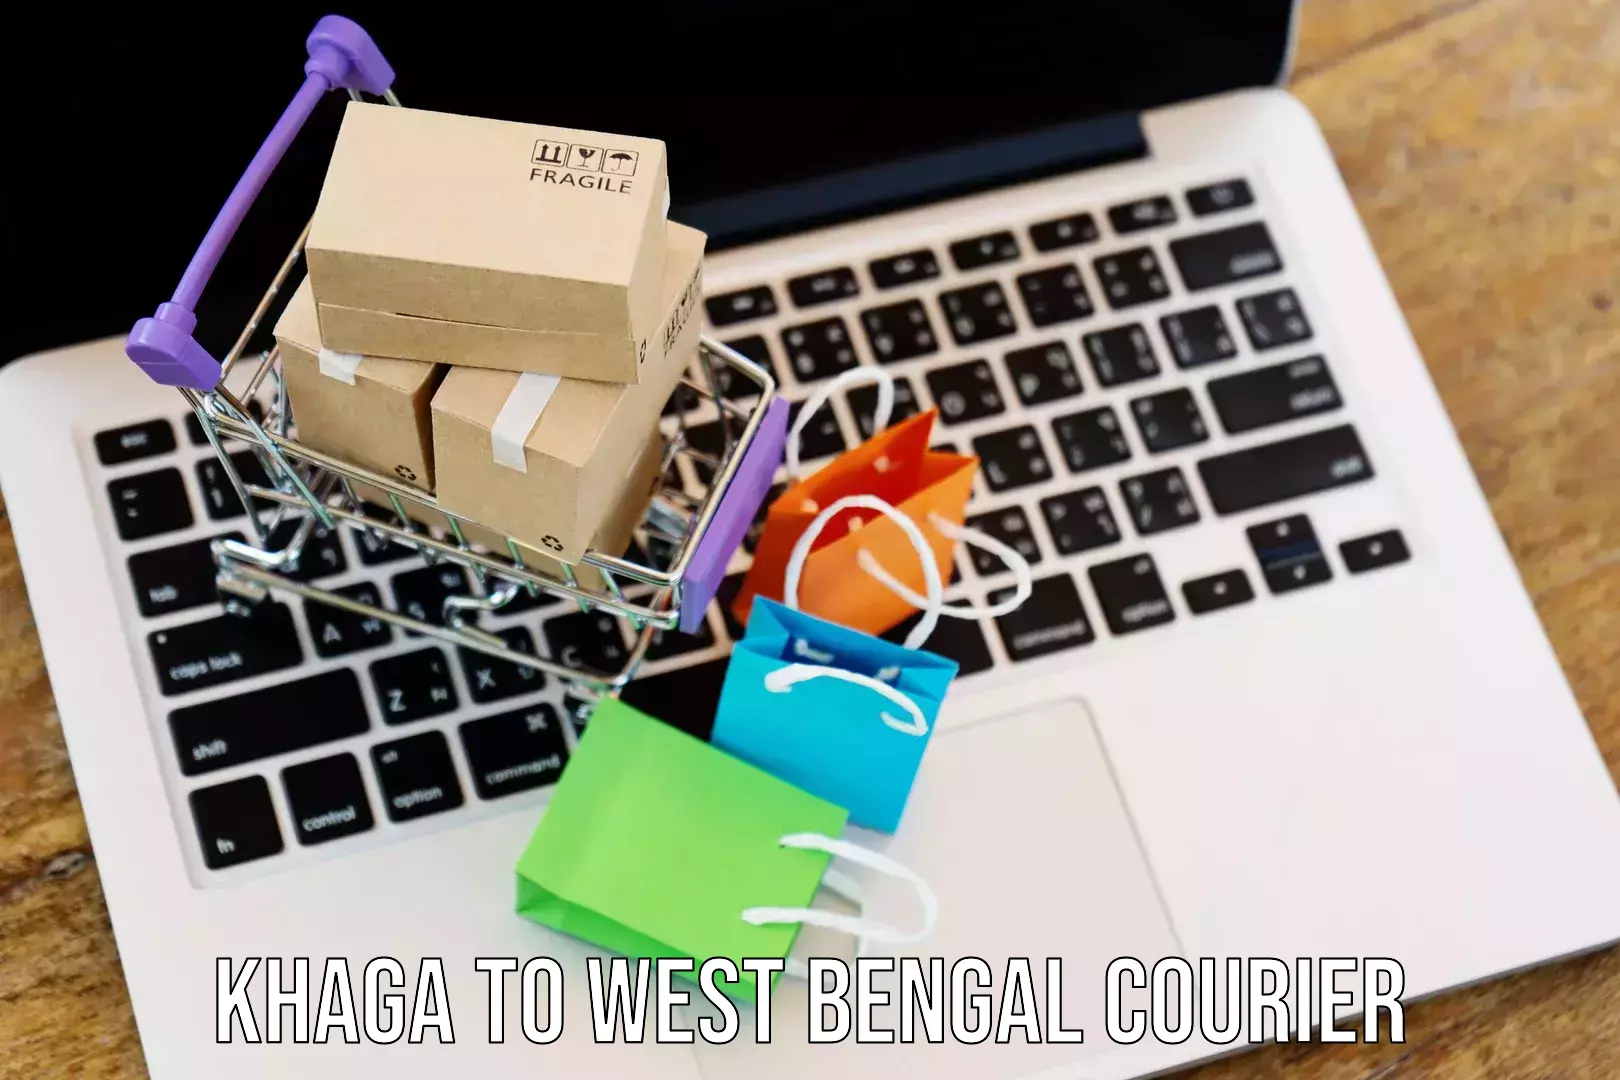 Overnight delivery services Khaga to West Bengal